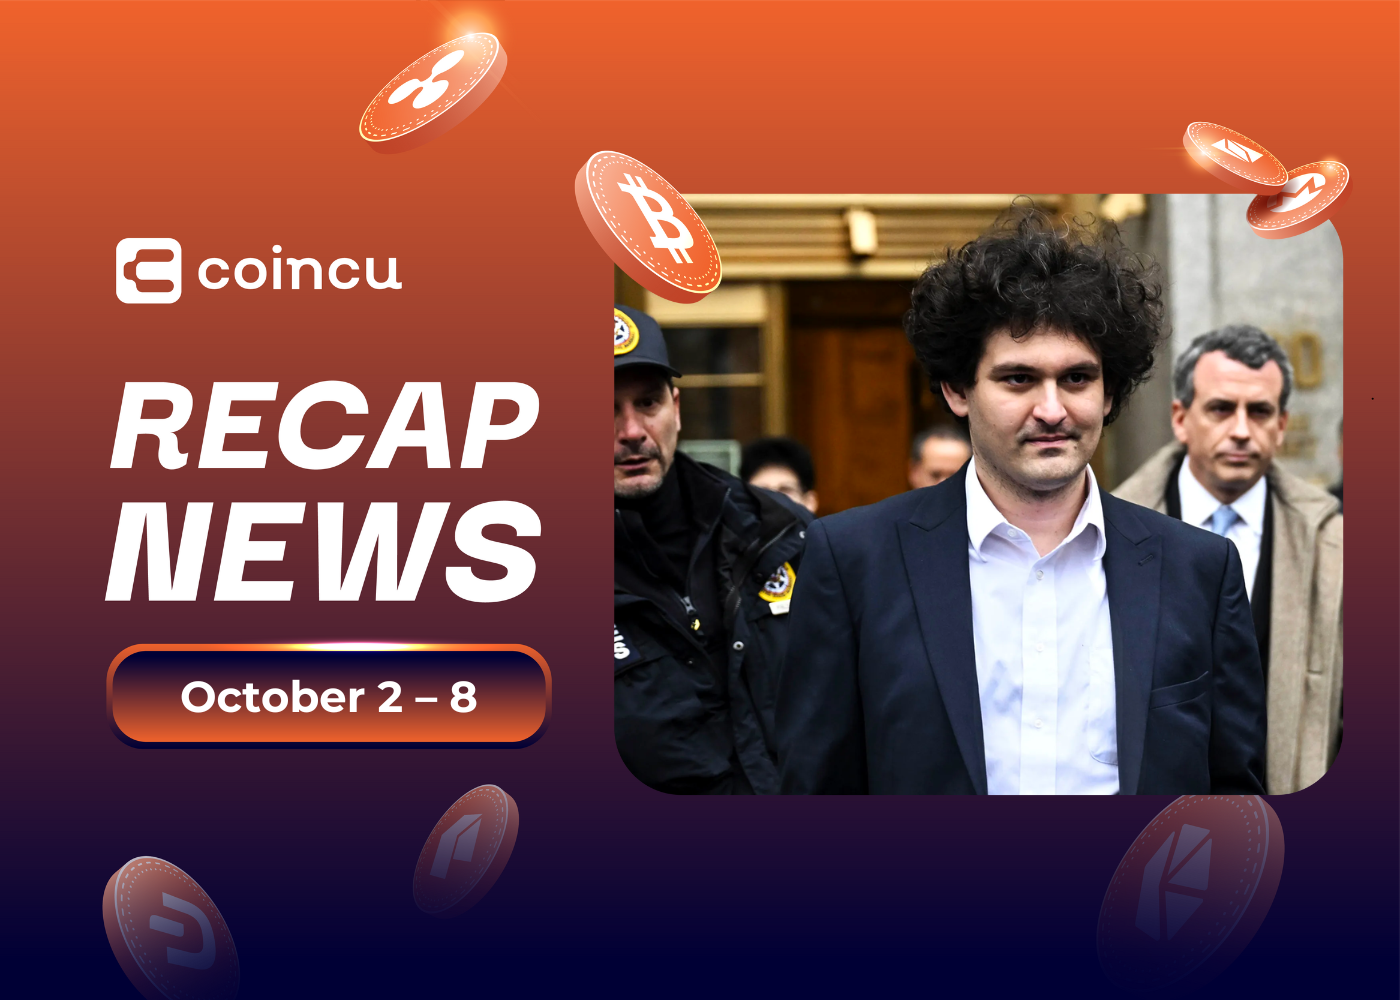 Weekly Top Crypto News (October 2 – October 8)